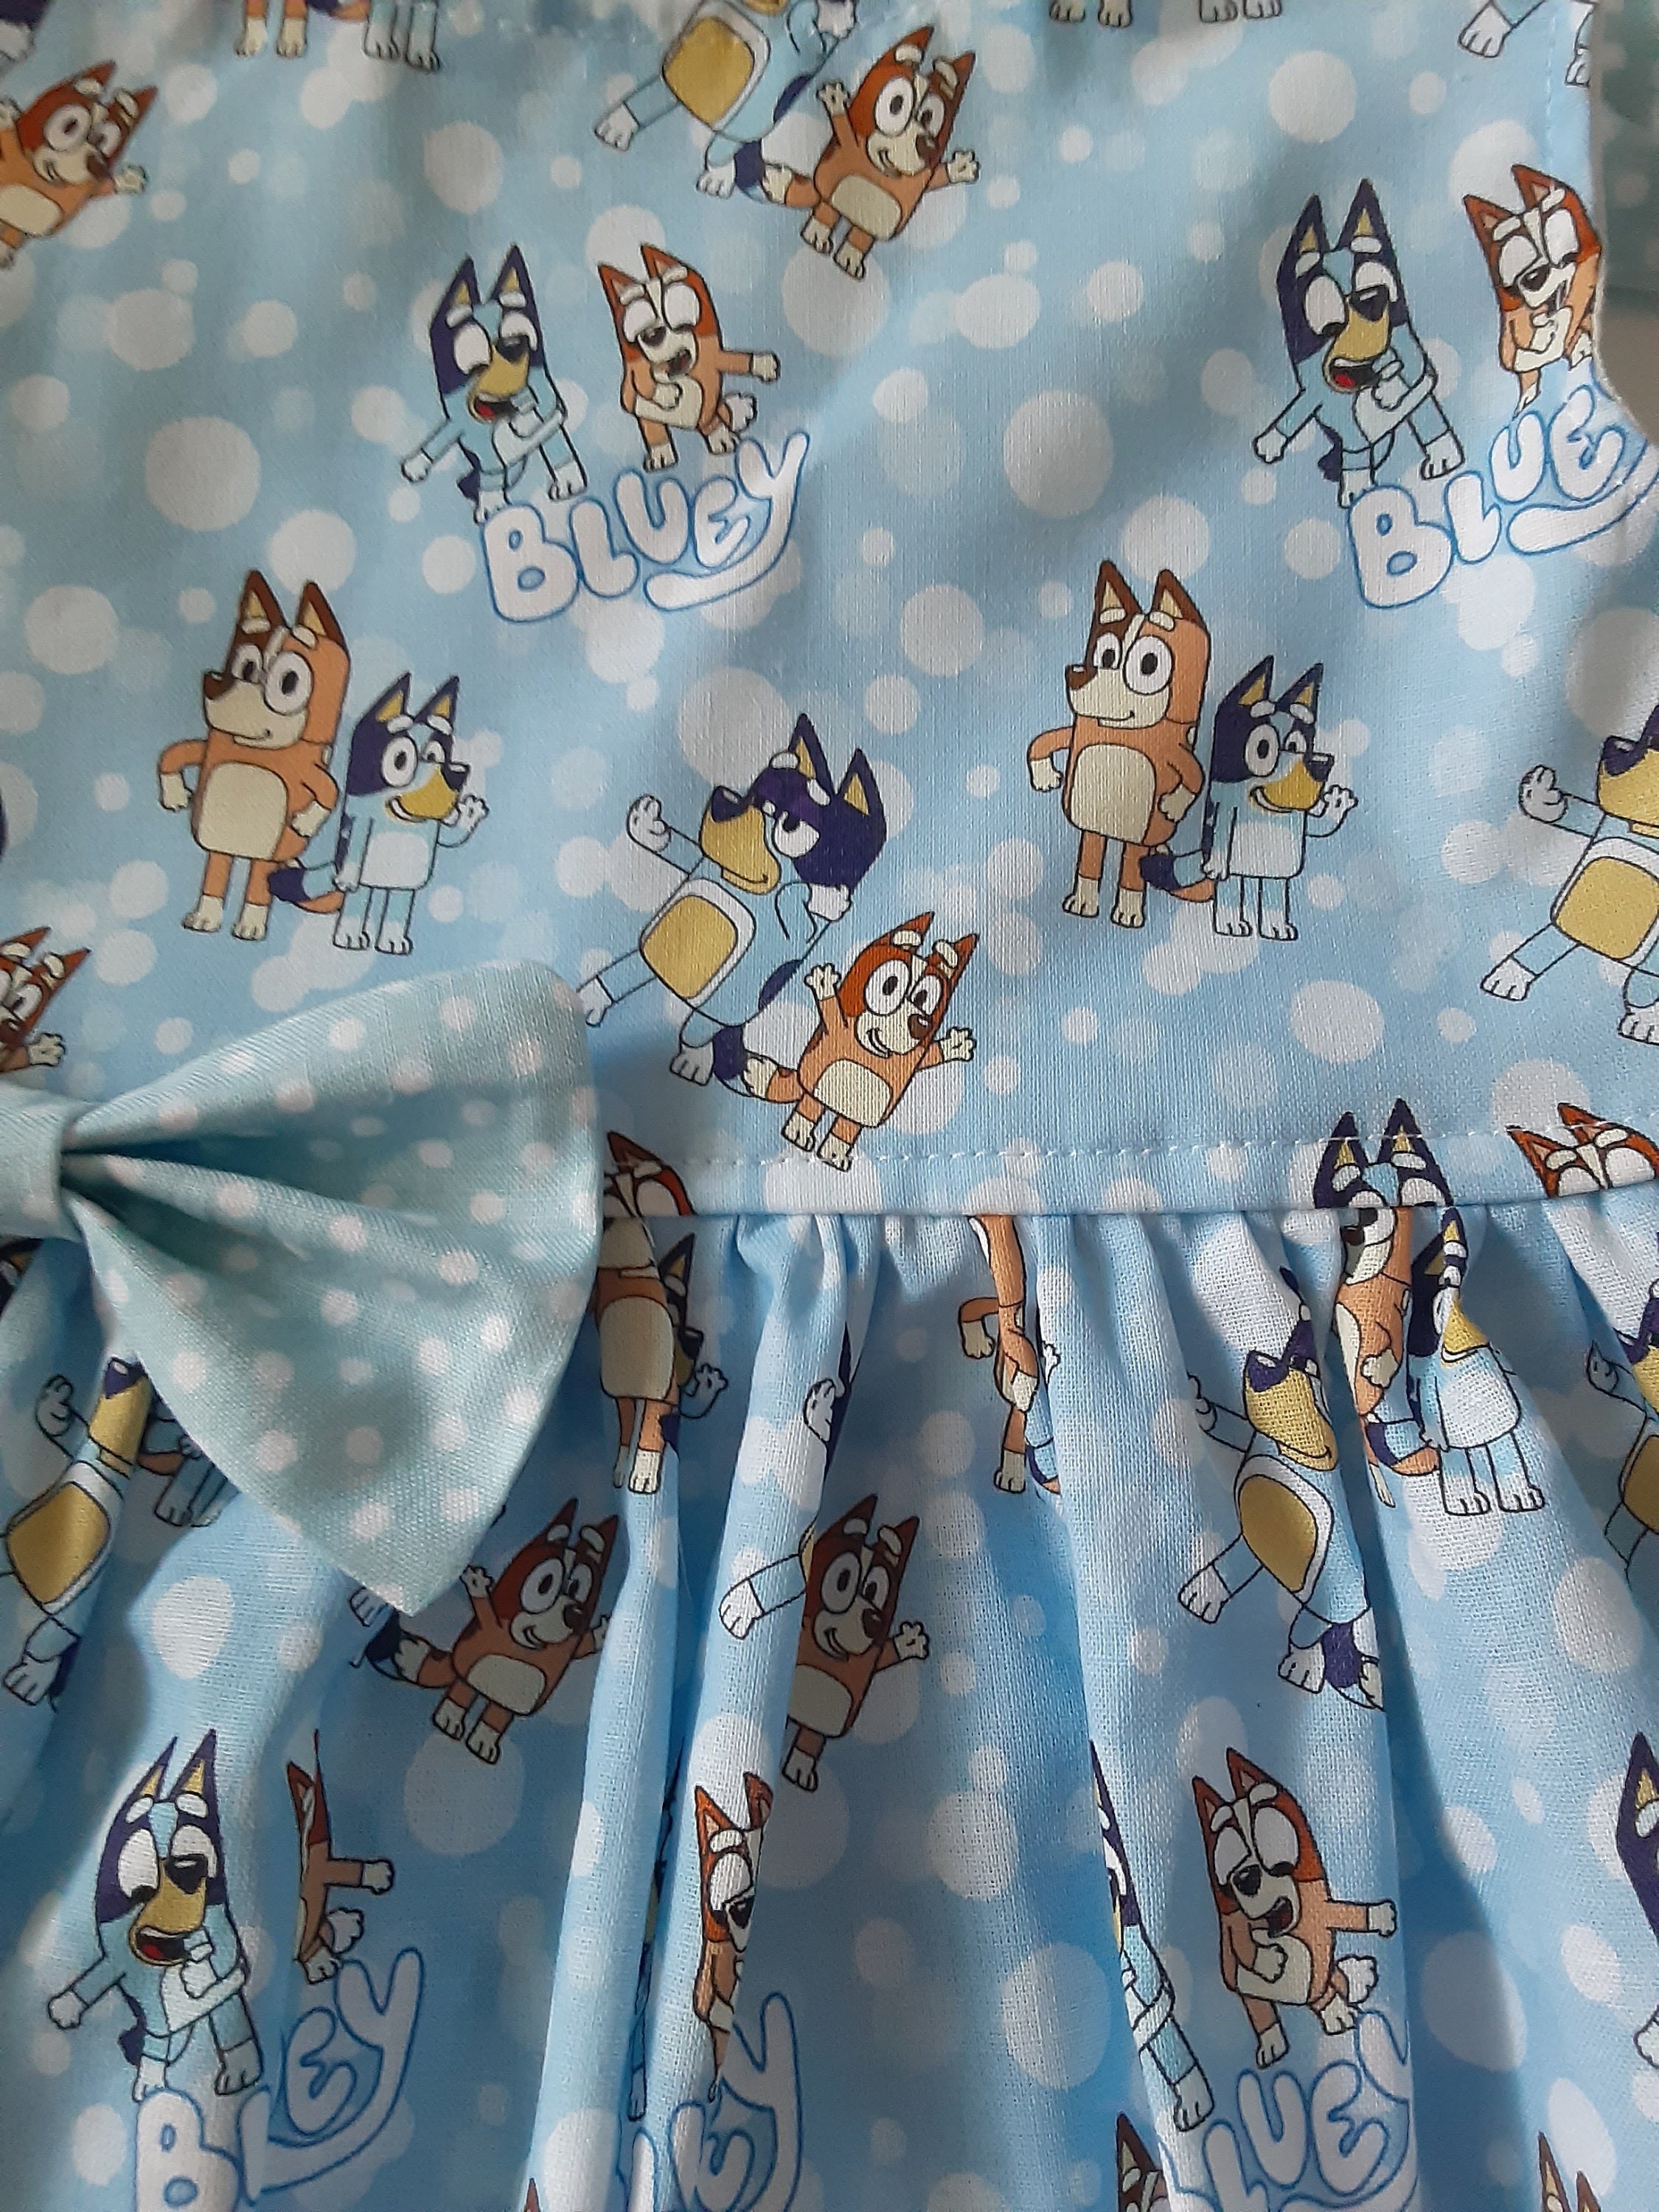 Bluey Tutu outfit, dog Birthday outfit